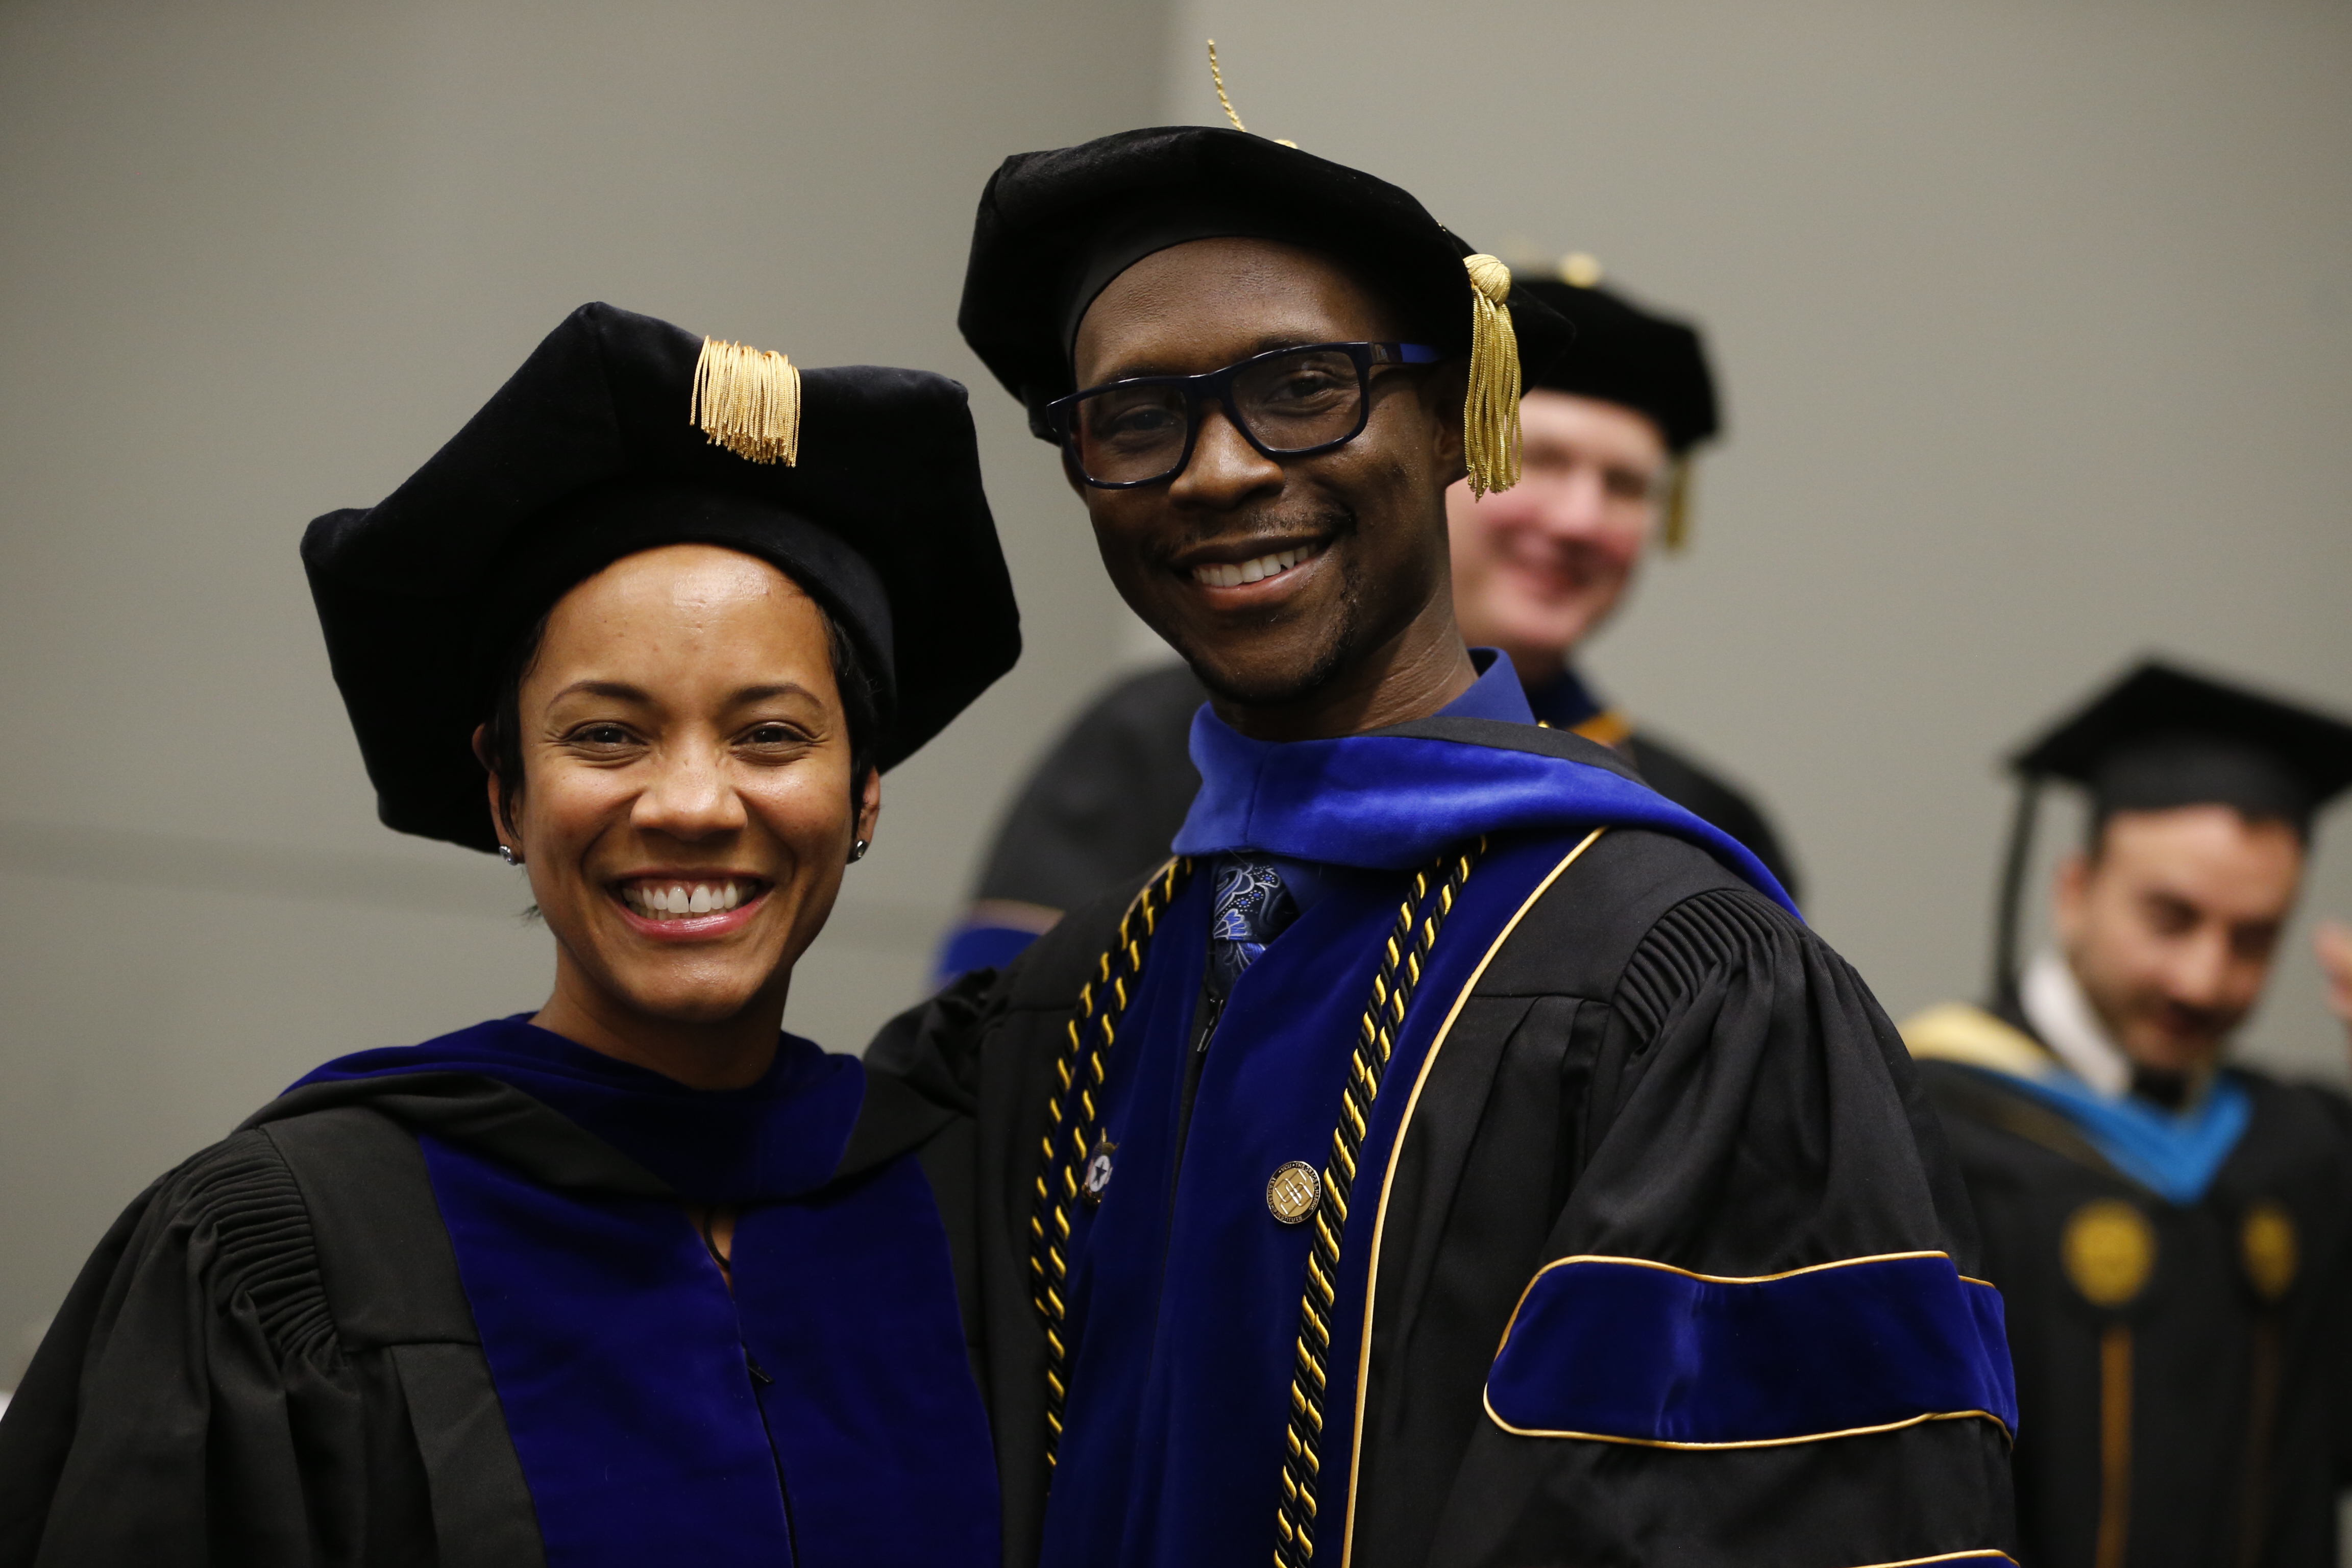 Diversity, Equity and Inclusion Committee members Shajuana Isom-Payne and Chernoh Wurie, Ph.D., pose for a photo at the Wilder School's graduation ceremony on May 12, 2018.